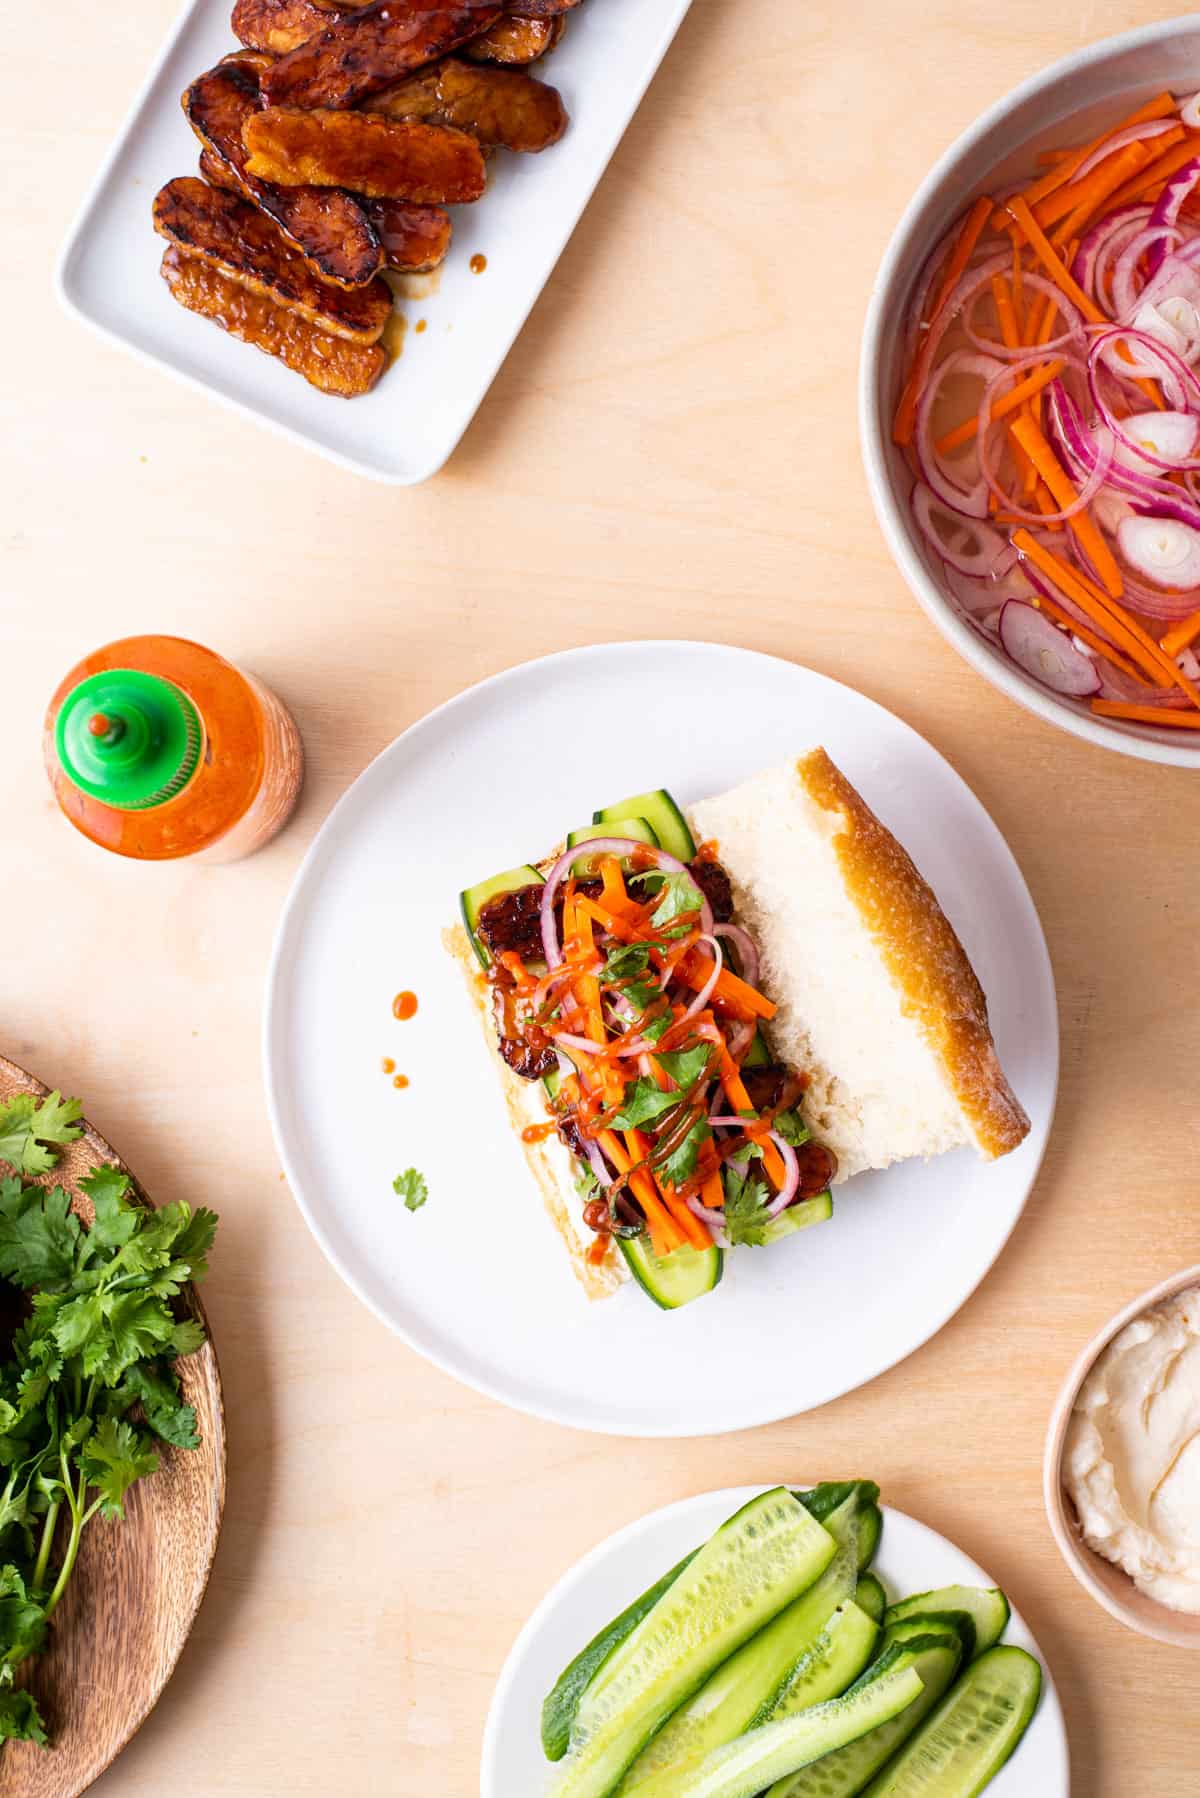 The making of a tempeh banh mi sandwich: glazed tempeh, pickled vegetables, cucumbers, and cilantro, laid out on a wooden table.